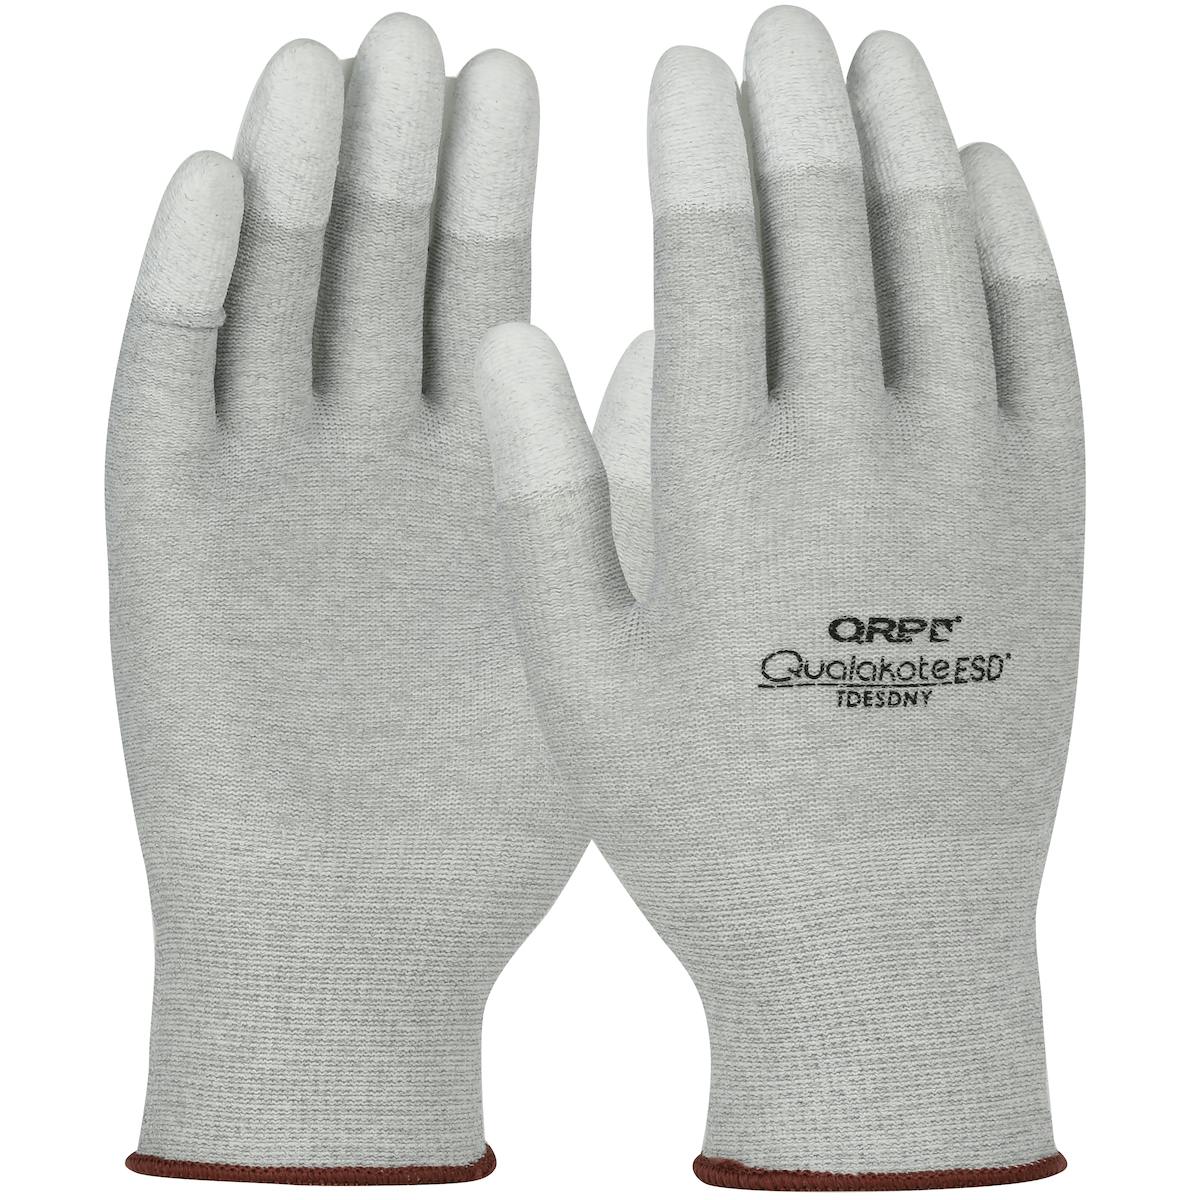 QRP® Qualakote® Seamless Knit Nylon/Carbon Fiber Electrostatic Dissipative (ESD) Glove with Polyurethane Coated Grip on Fingertips (TDESDNY)